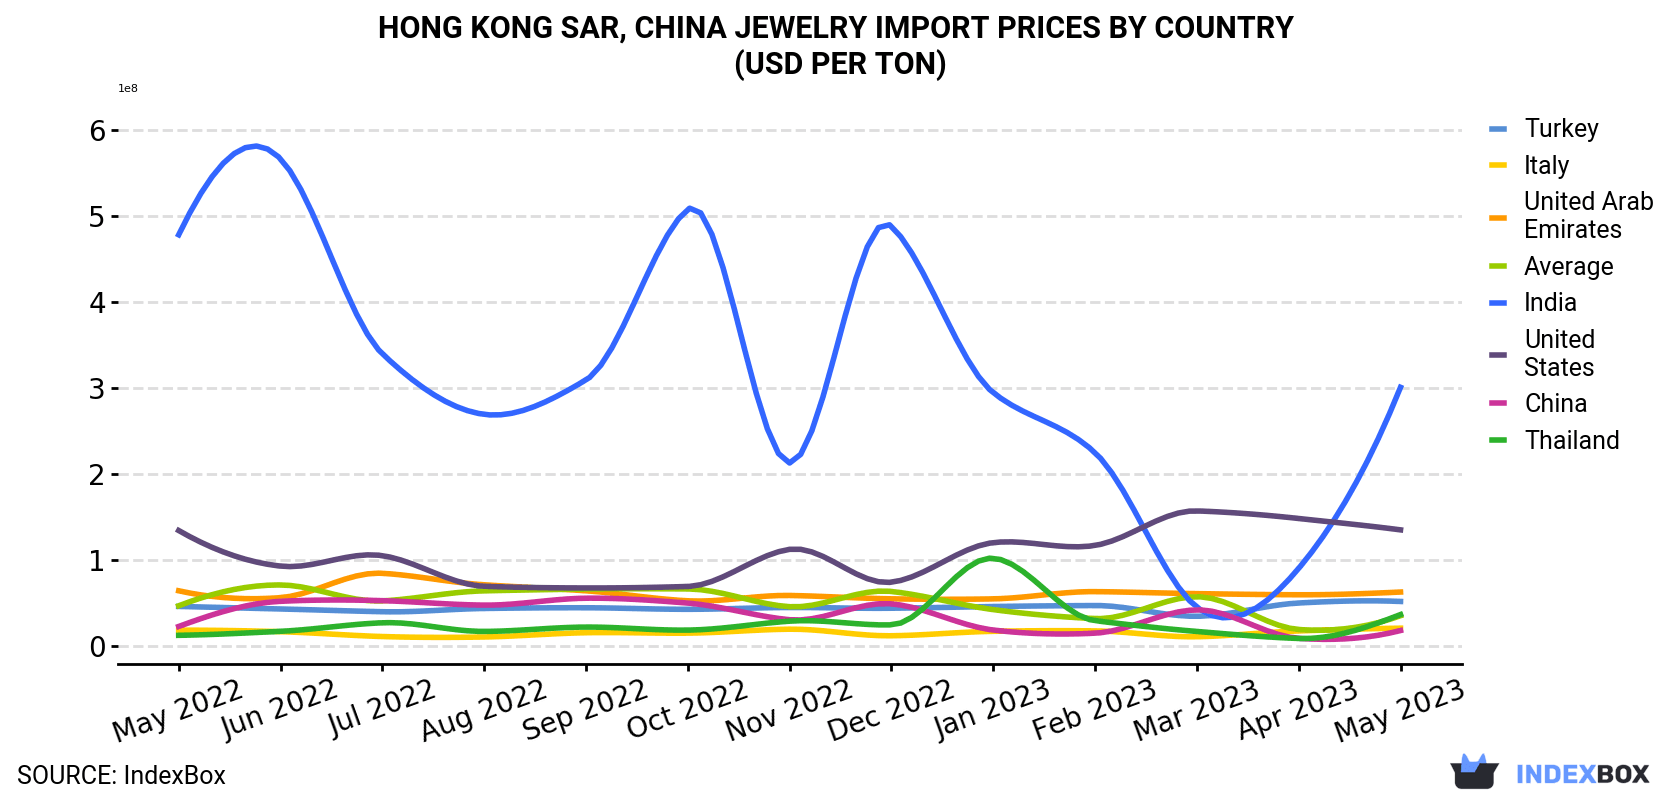 Hong Kong Jewelry Import Prices By Country (USD Per Ton)